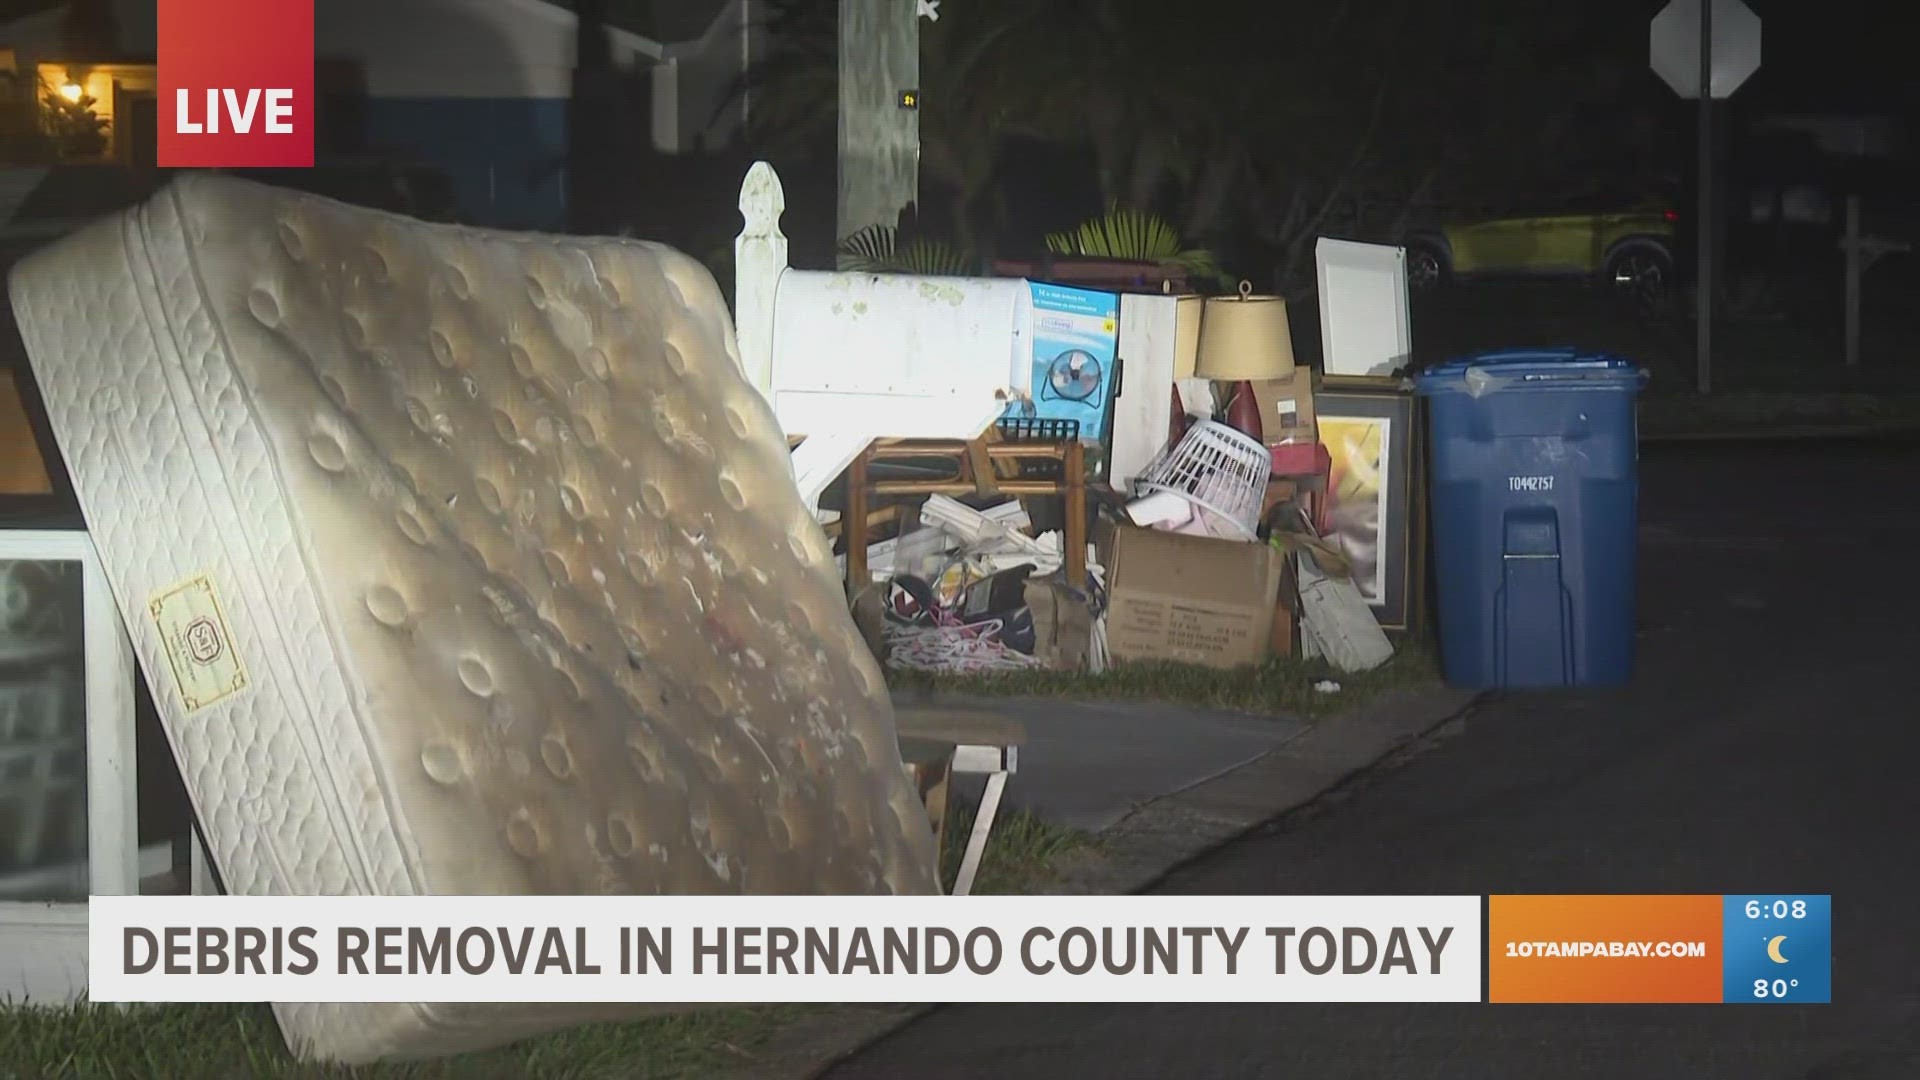 Debris and trash removal is in progress as Hernando County residents continue cleanup efforts after Hurricane Idalia.